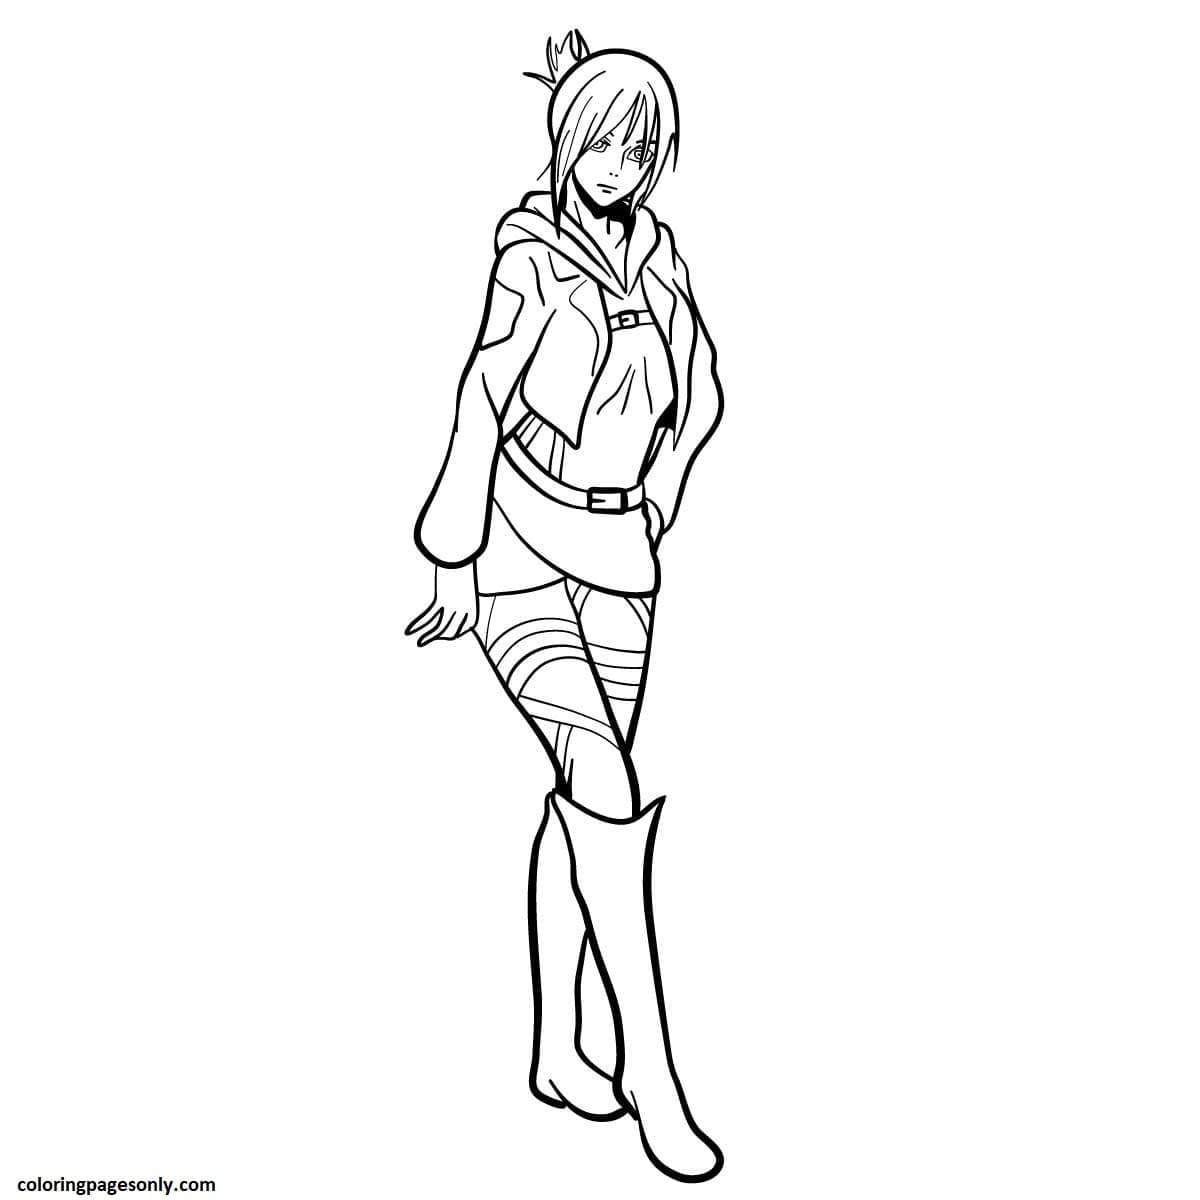 Mikasa Full Body Coloring Pages